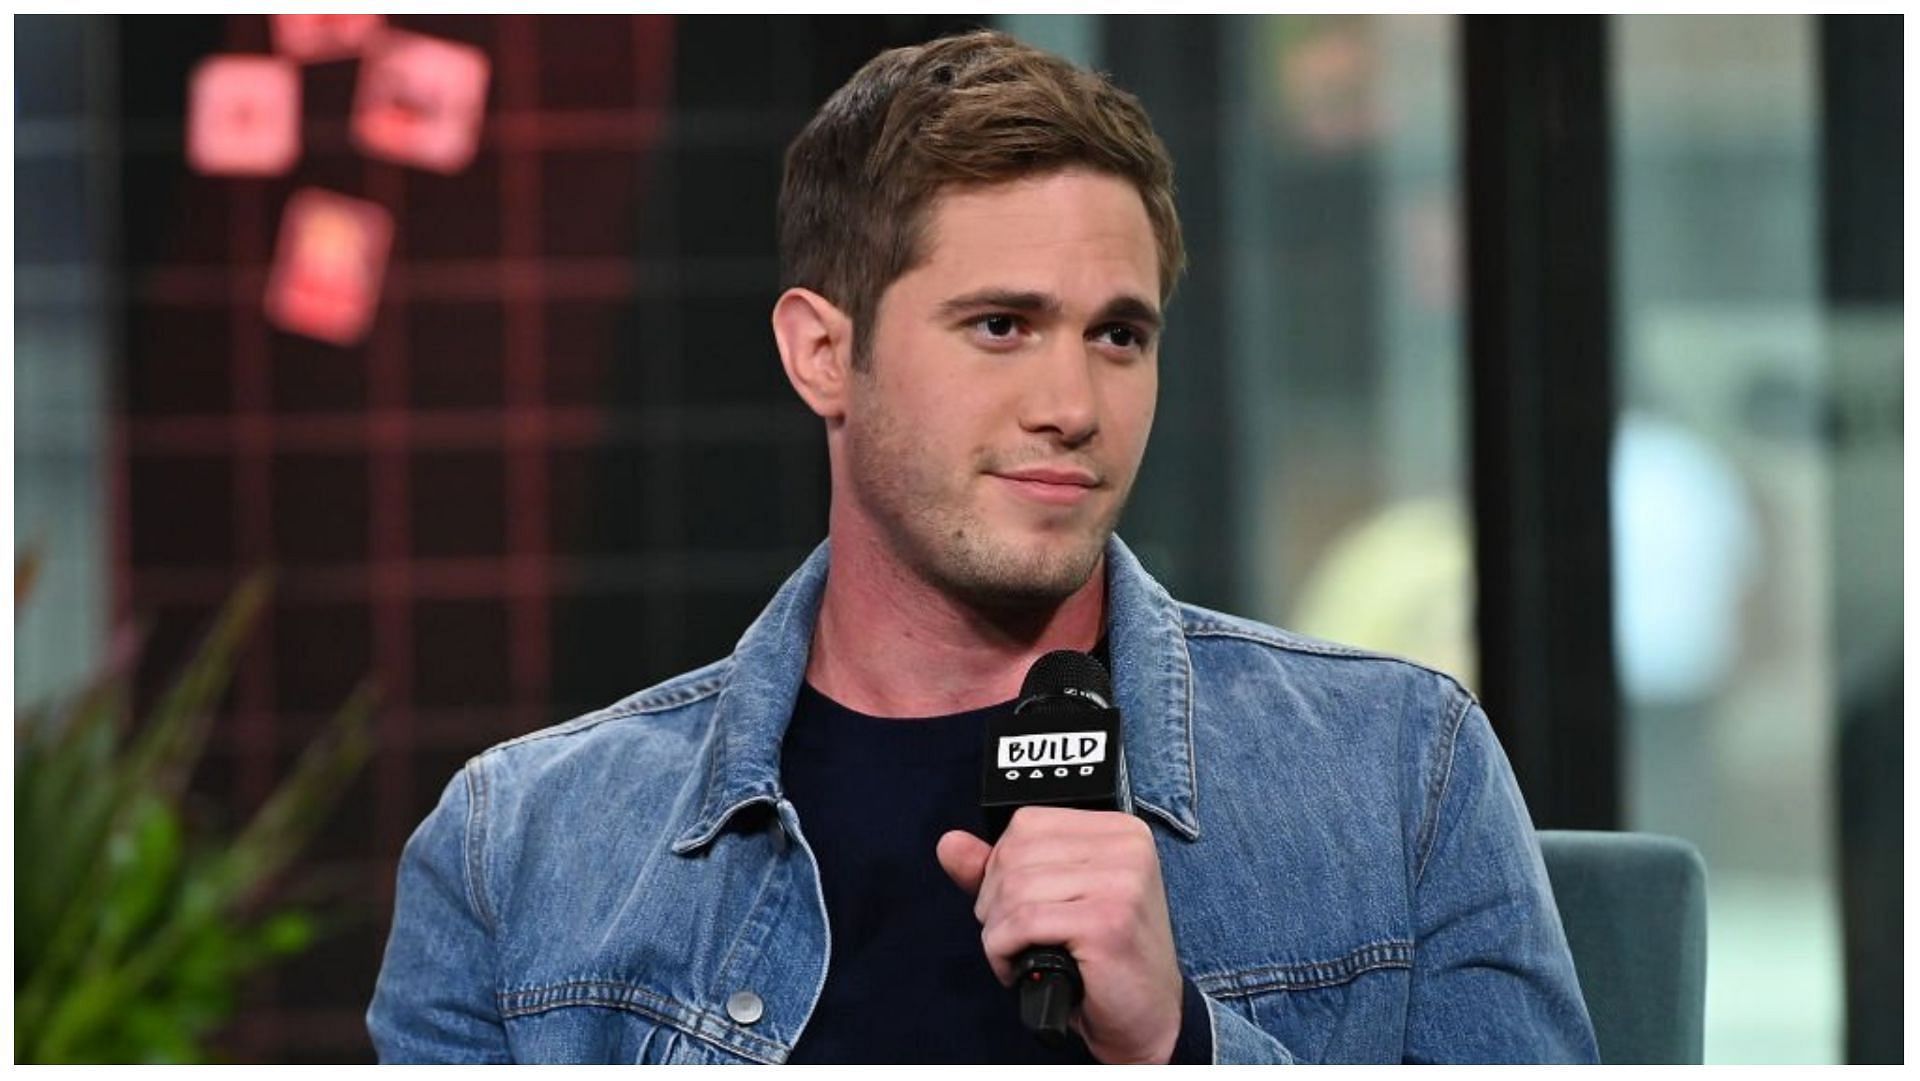 Blake Jenner has earned a lot of wealth from his career as an actor (Image via Slaven Vlasic/Getty Images)